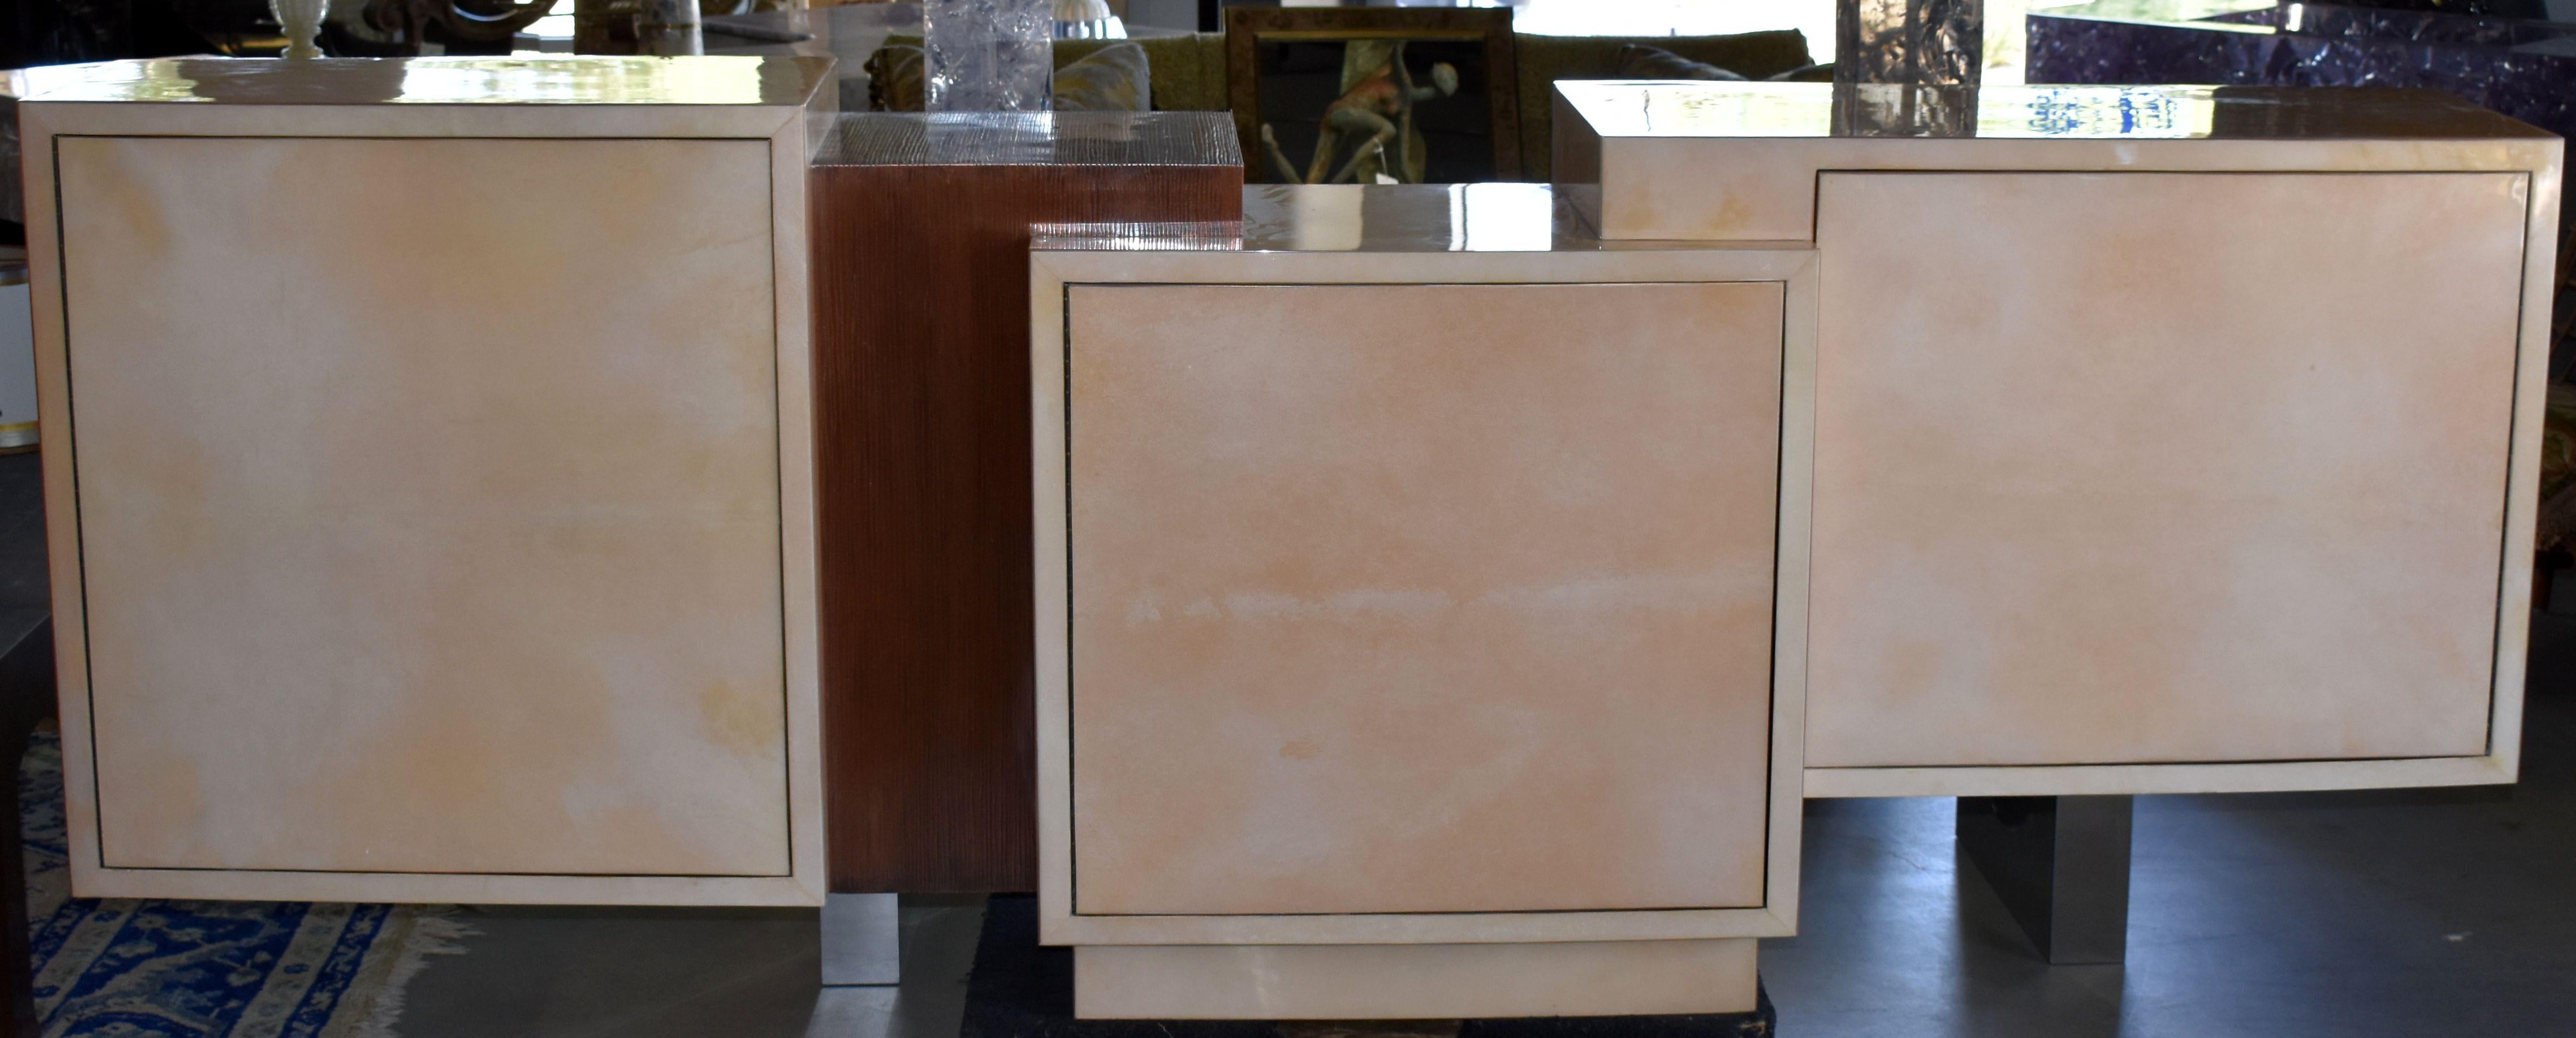 Elegant artistic design sideboard cover with goatskin and finish with resin and copper. Credenza has three doors with glass shelves and cover with exotic wood.

Additional Dimensions:

D each side:
left side 17.5 inches middle side 20 inches